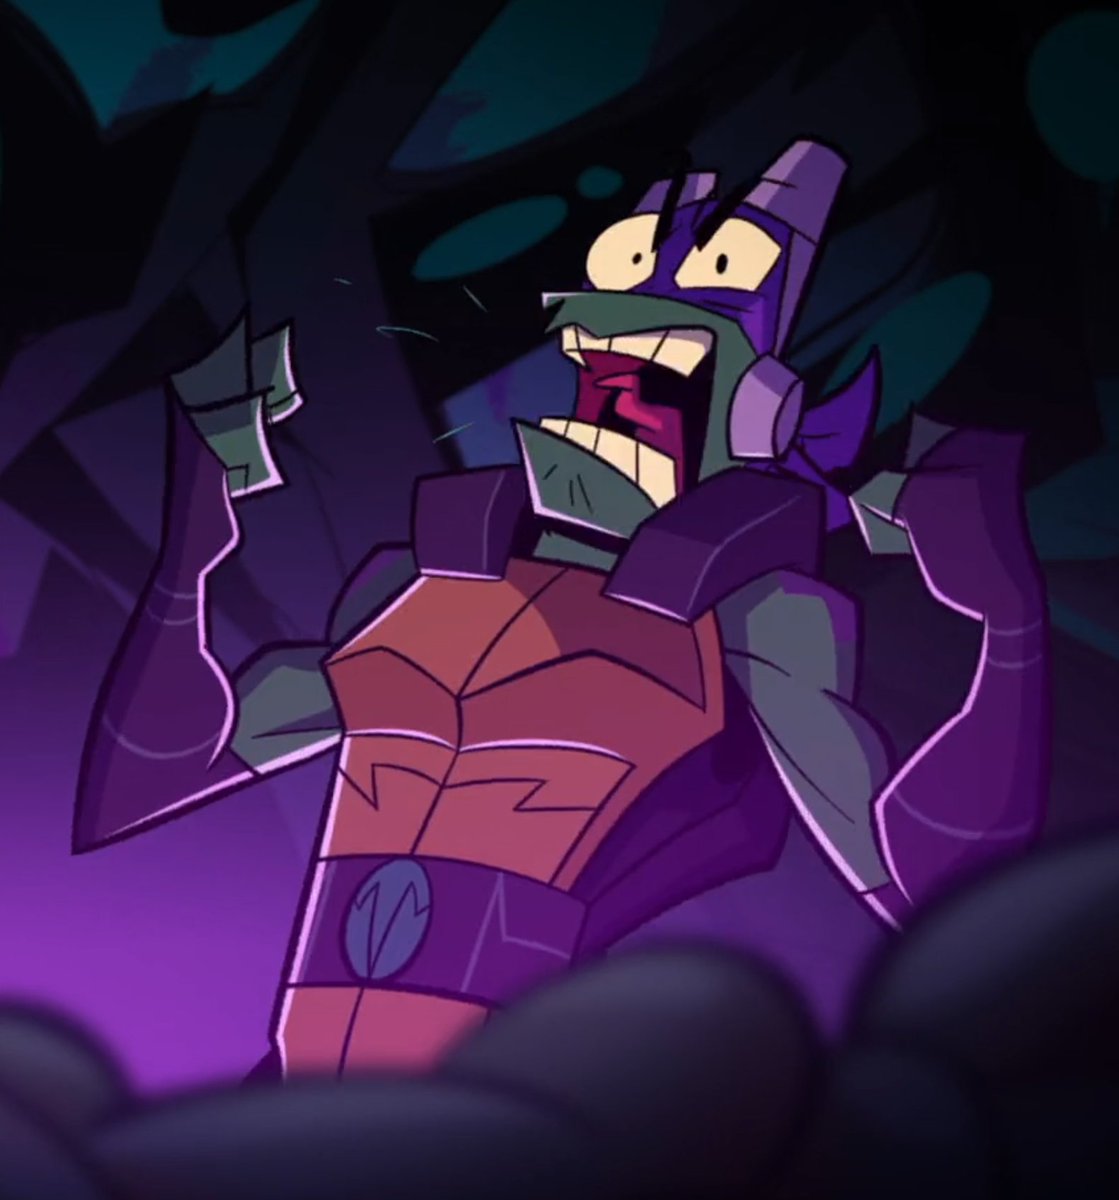 Now with the deadline set in place, there's no going back. (and if @PowerAuerArt were to vigorously finish her part early, we'll release it earlier) #rottmntrestored #rottmnt